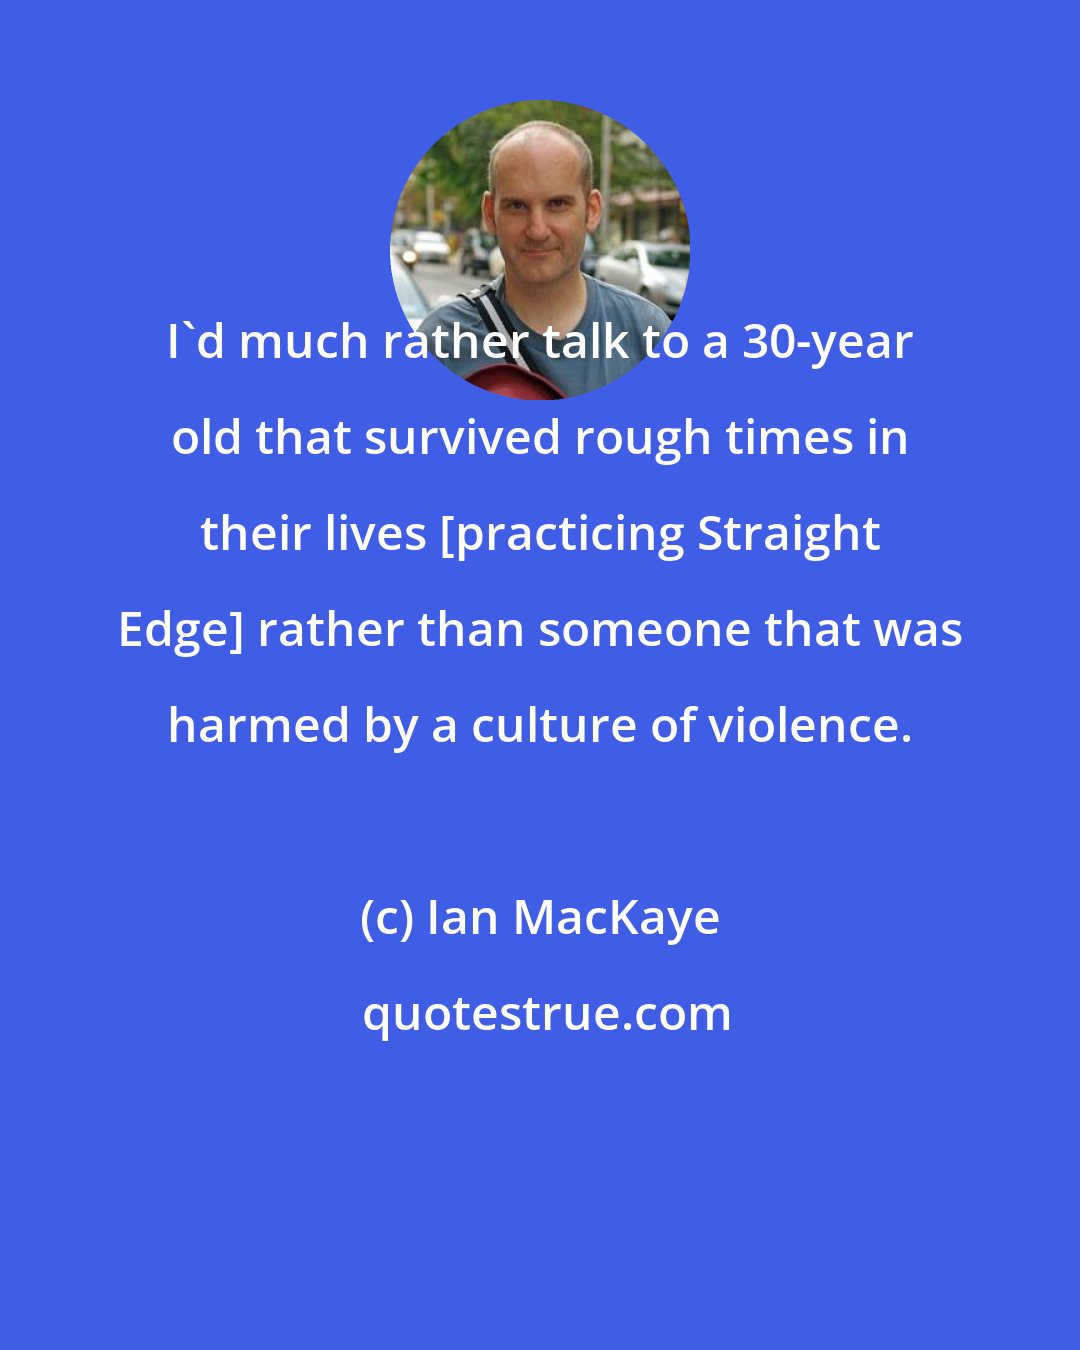 Ian MacKaye: I'd much rather talk to a 30-year old that survived rough times in their lives [practicing Straight Edge] rather than someone that was harmed by a culture of violence.